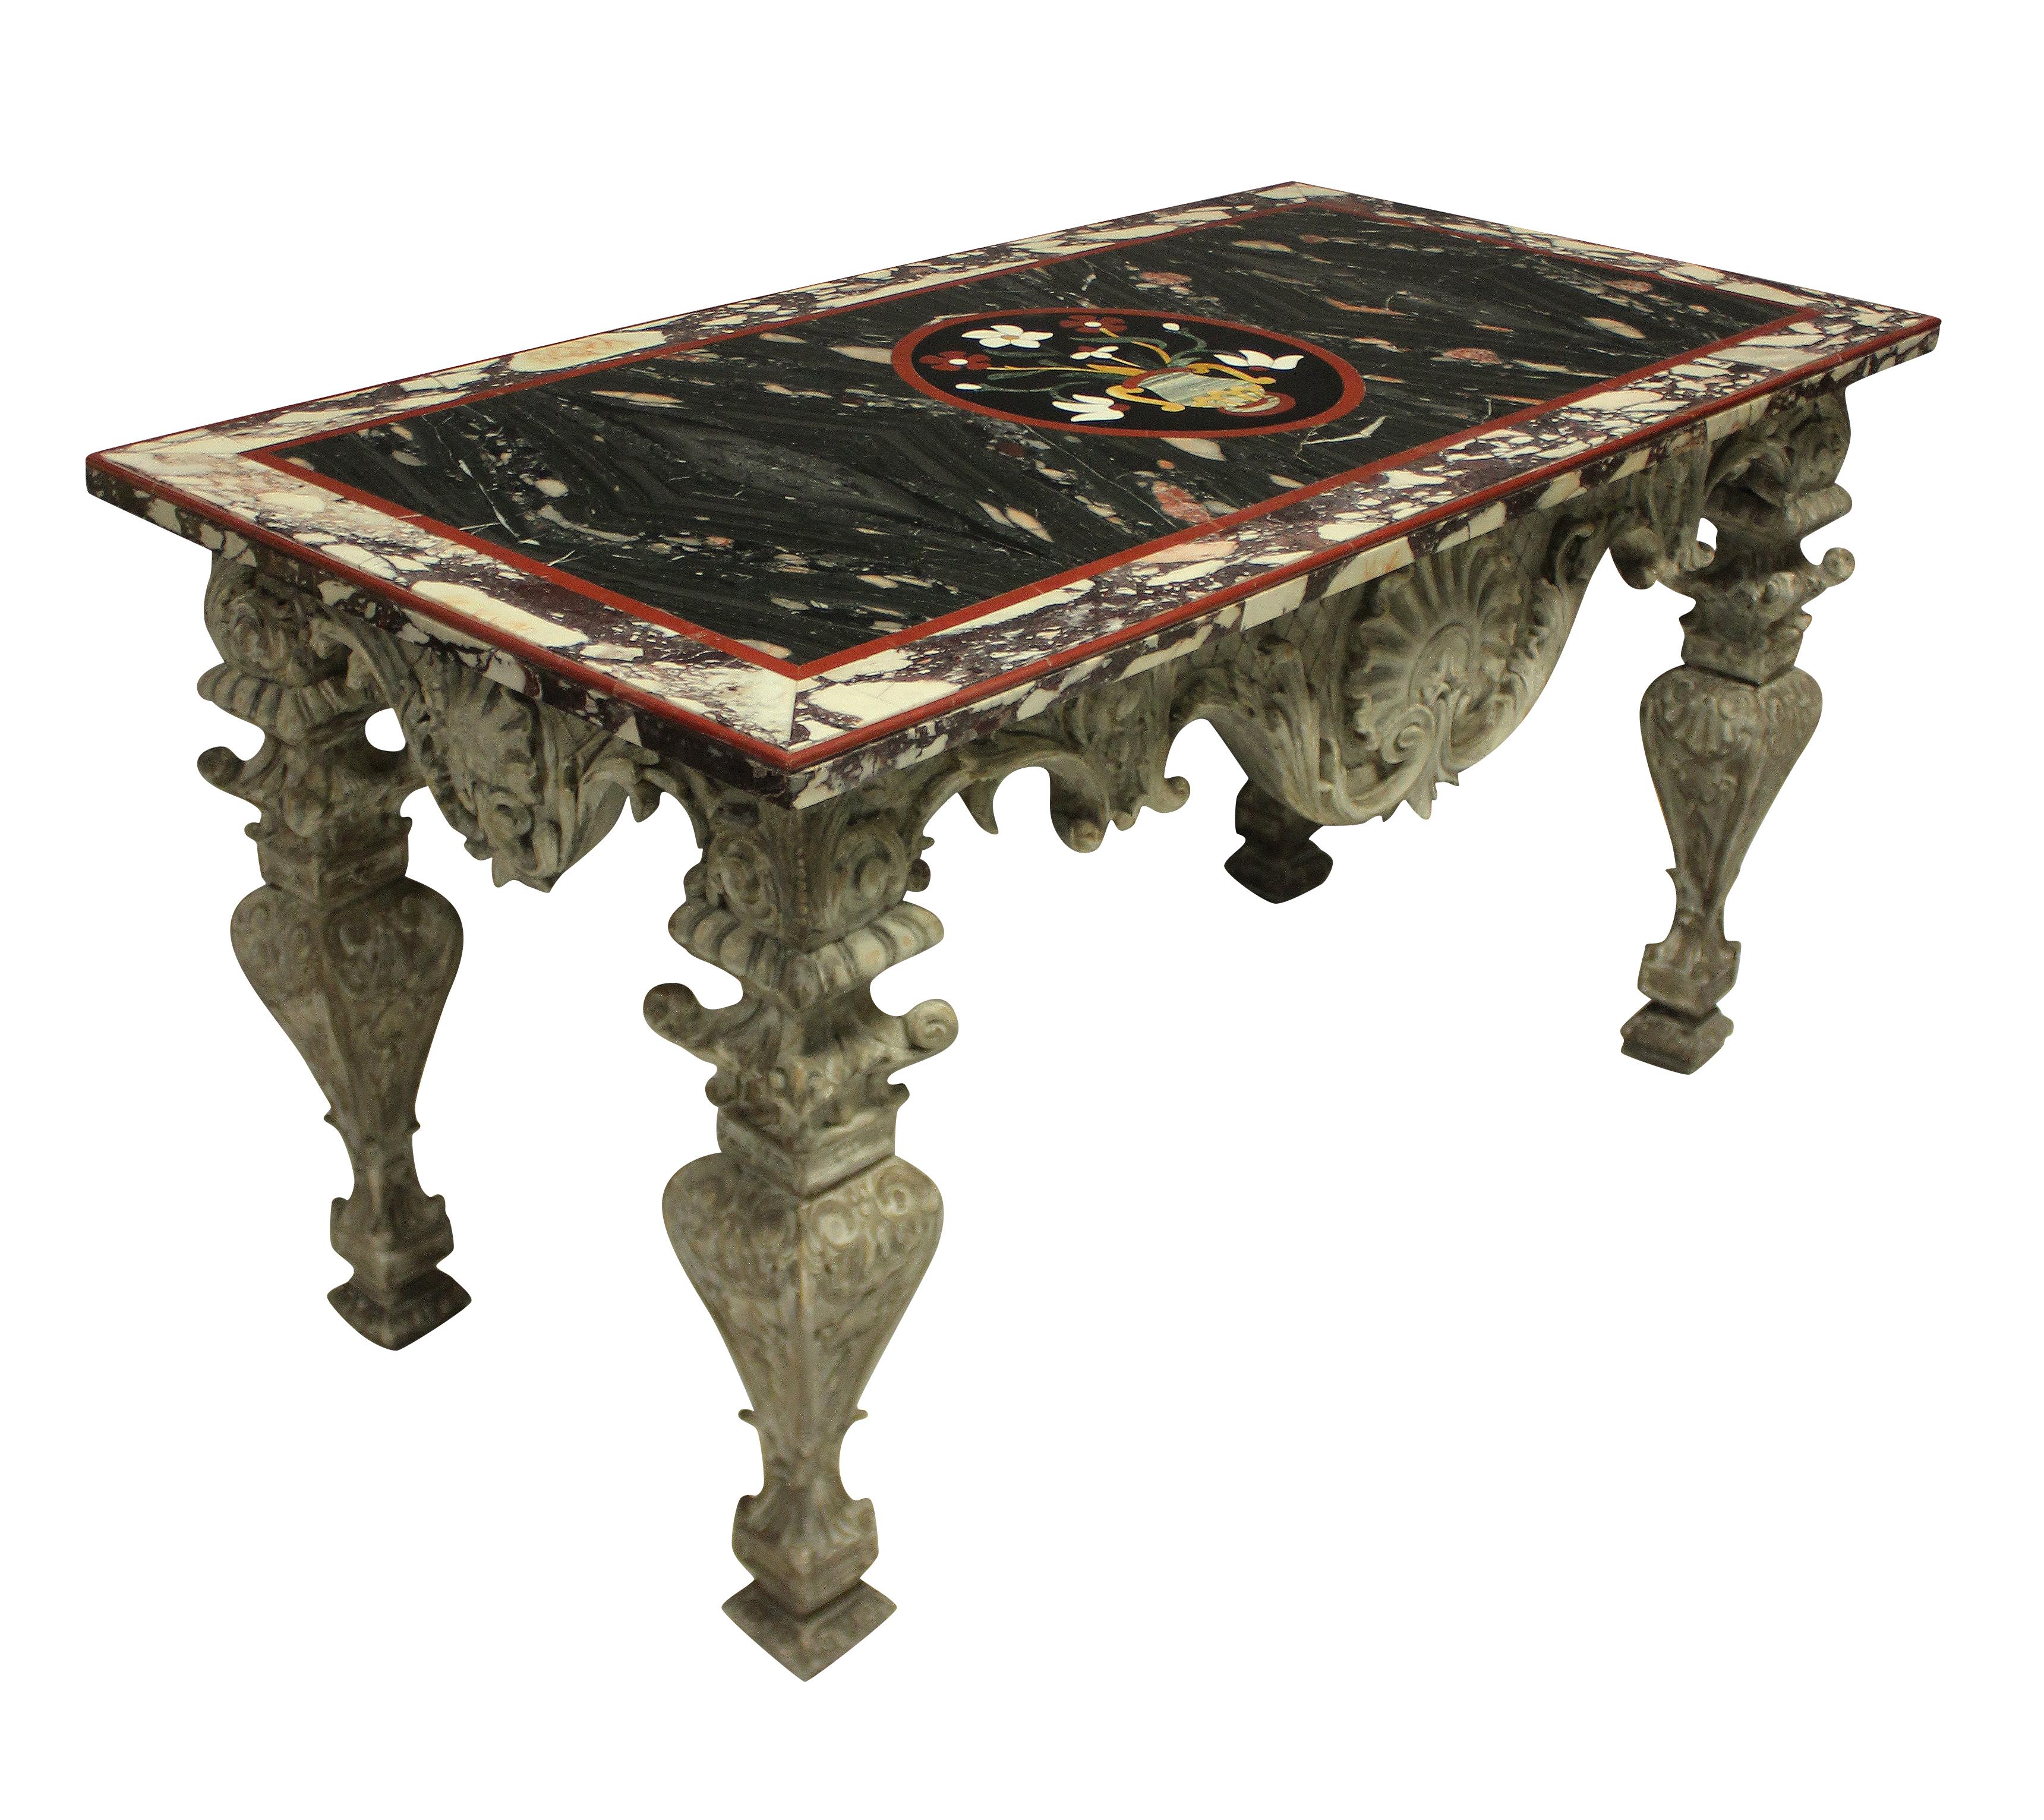 An Italian Baroque heavily carved and distressed painted walnut centre table. With shell and acanthus detailing throughout, supporting a Pietra Dura marble top. The top in various marbles and hardstones, with a shaped carnelian edge, with a central